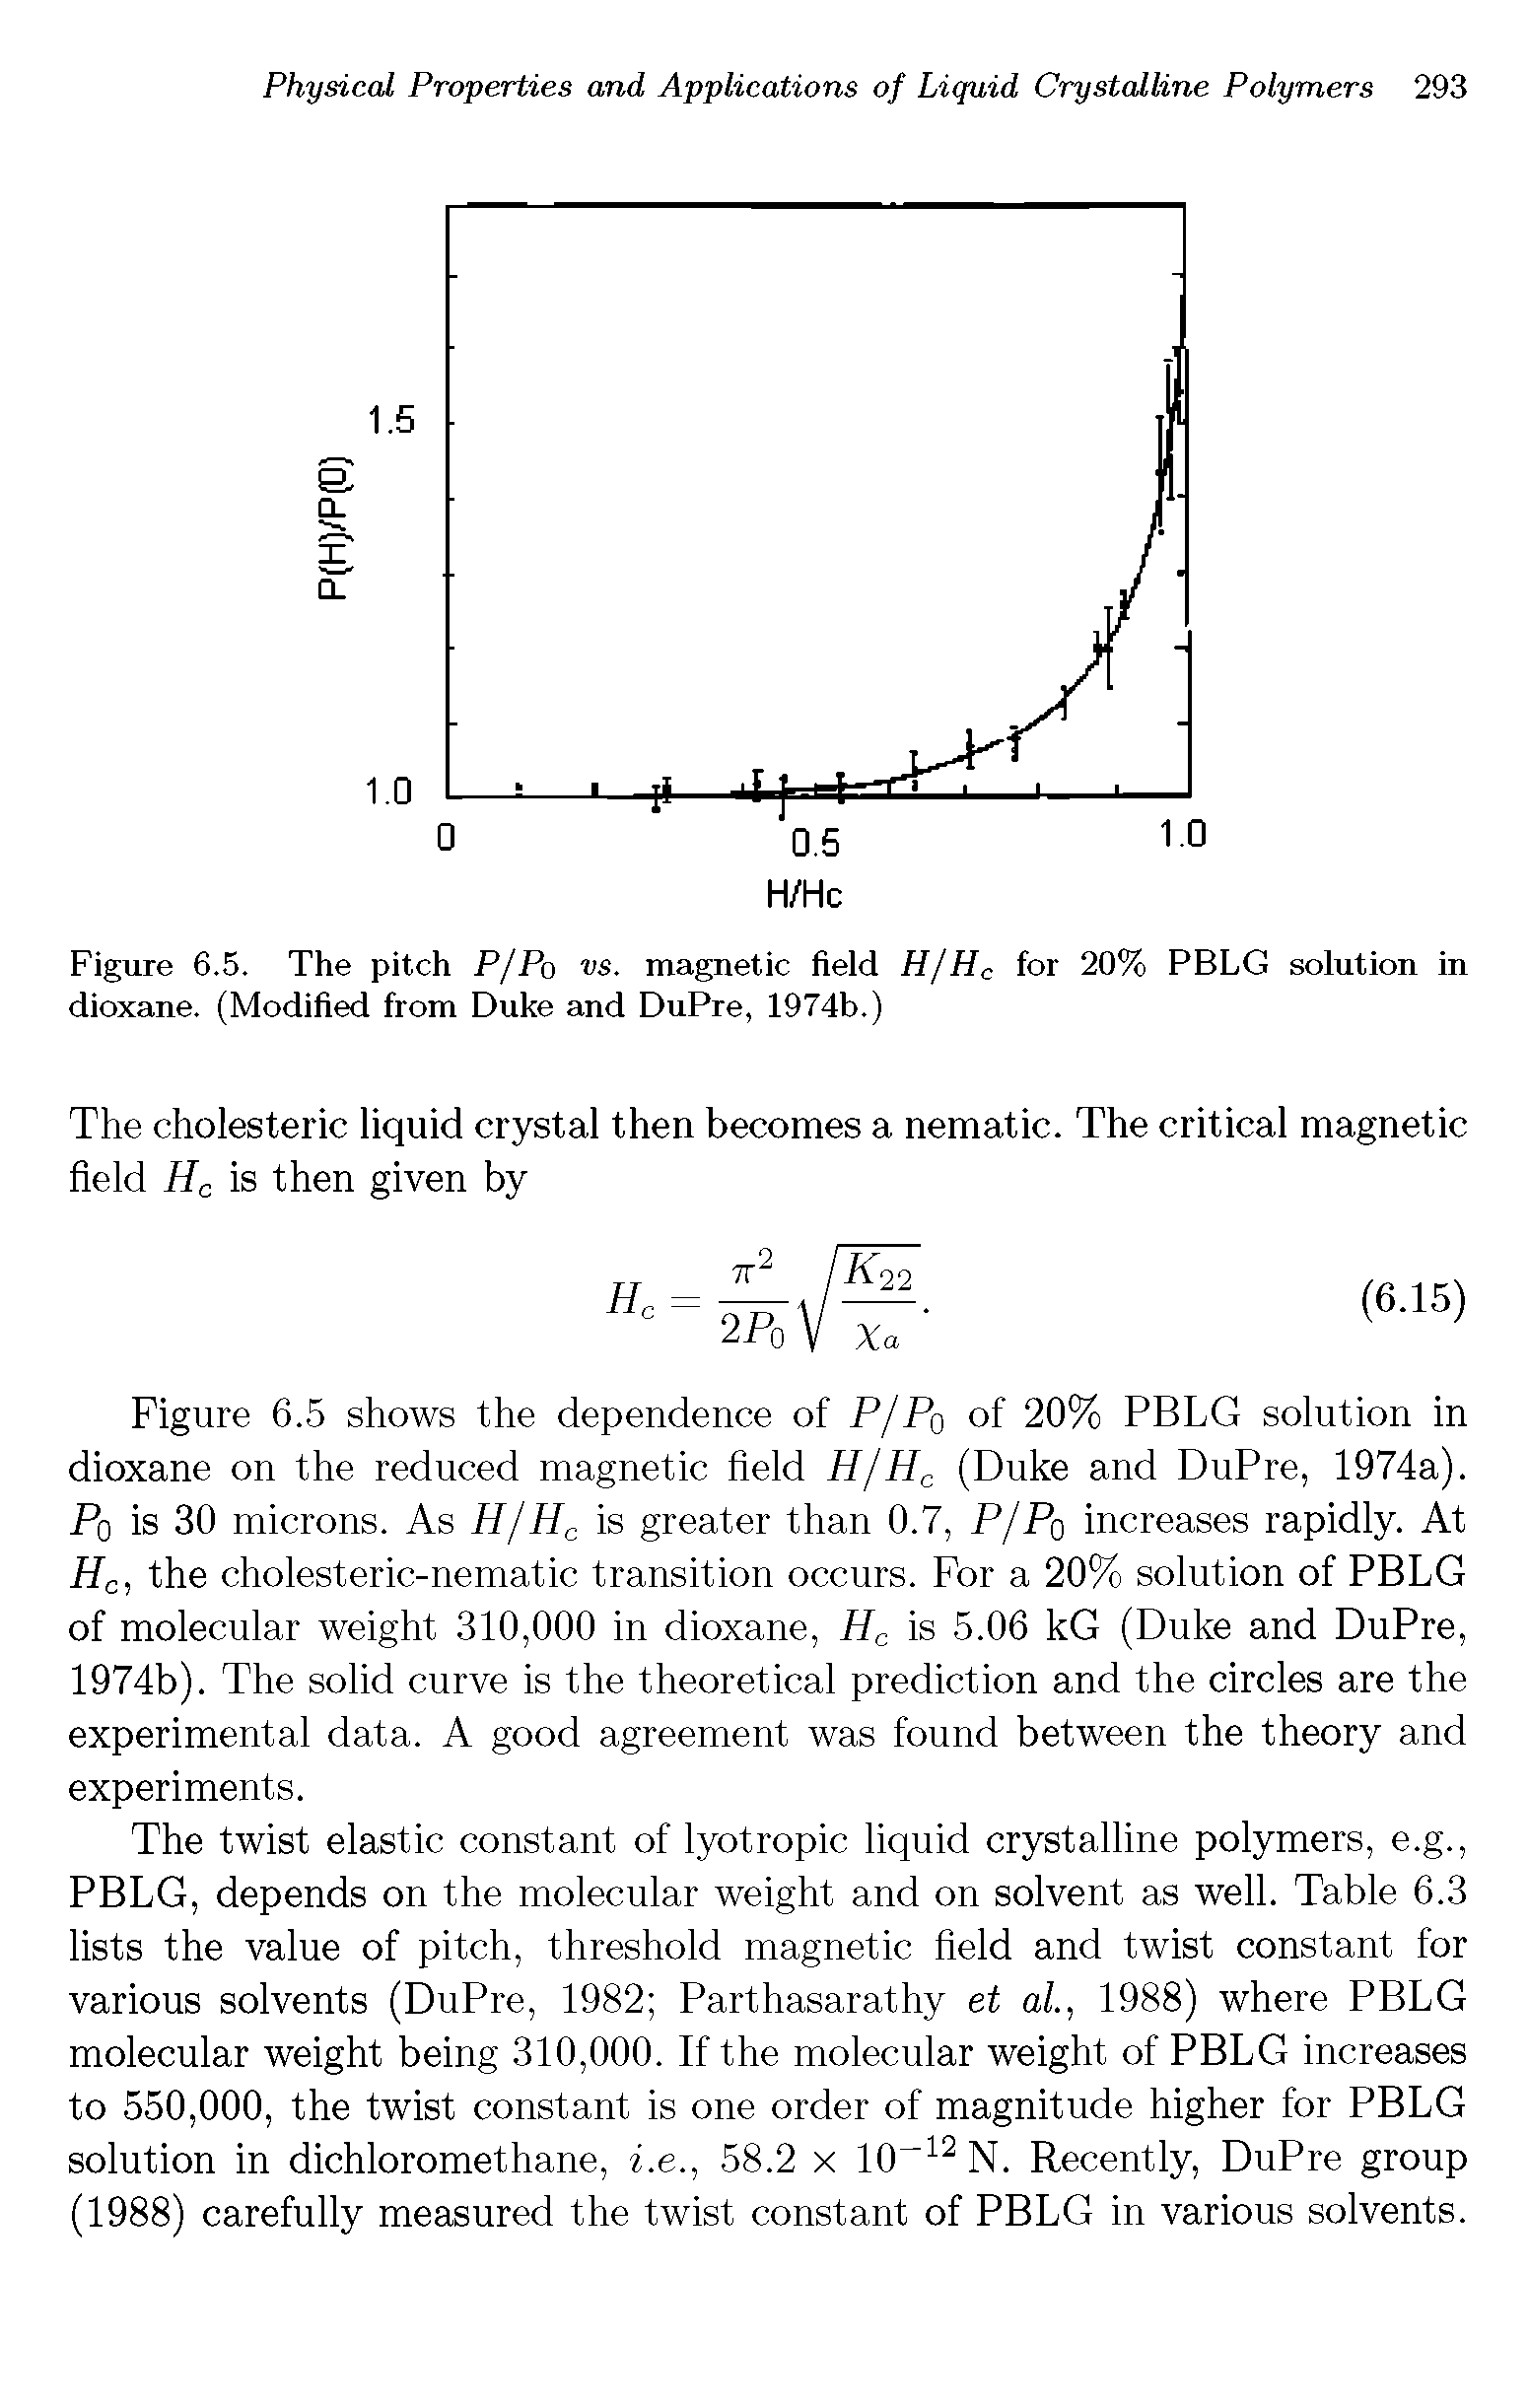 Figure 6.5. The pitch P/Po vs. magnetic field H/Hc for 20% PBLG solution in dioxane. (Modified from Duke and DuPre, 1974b.)...